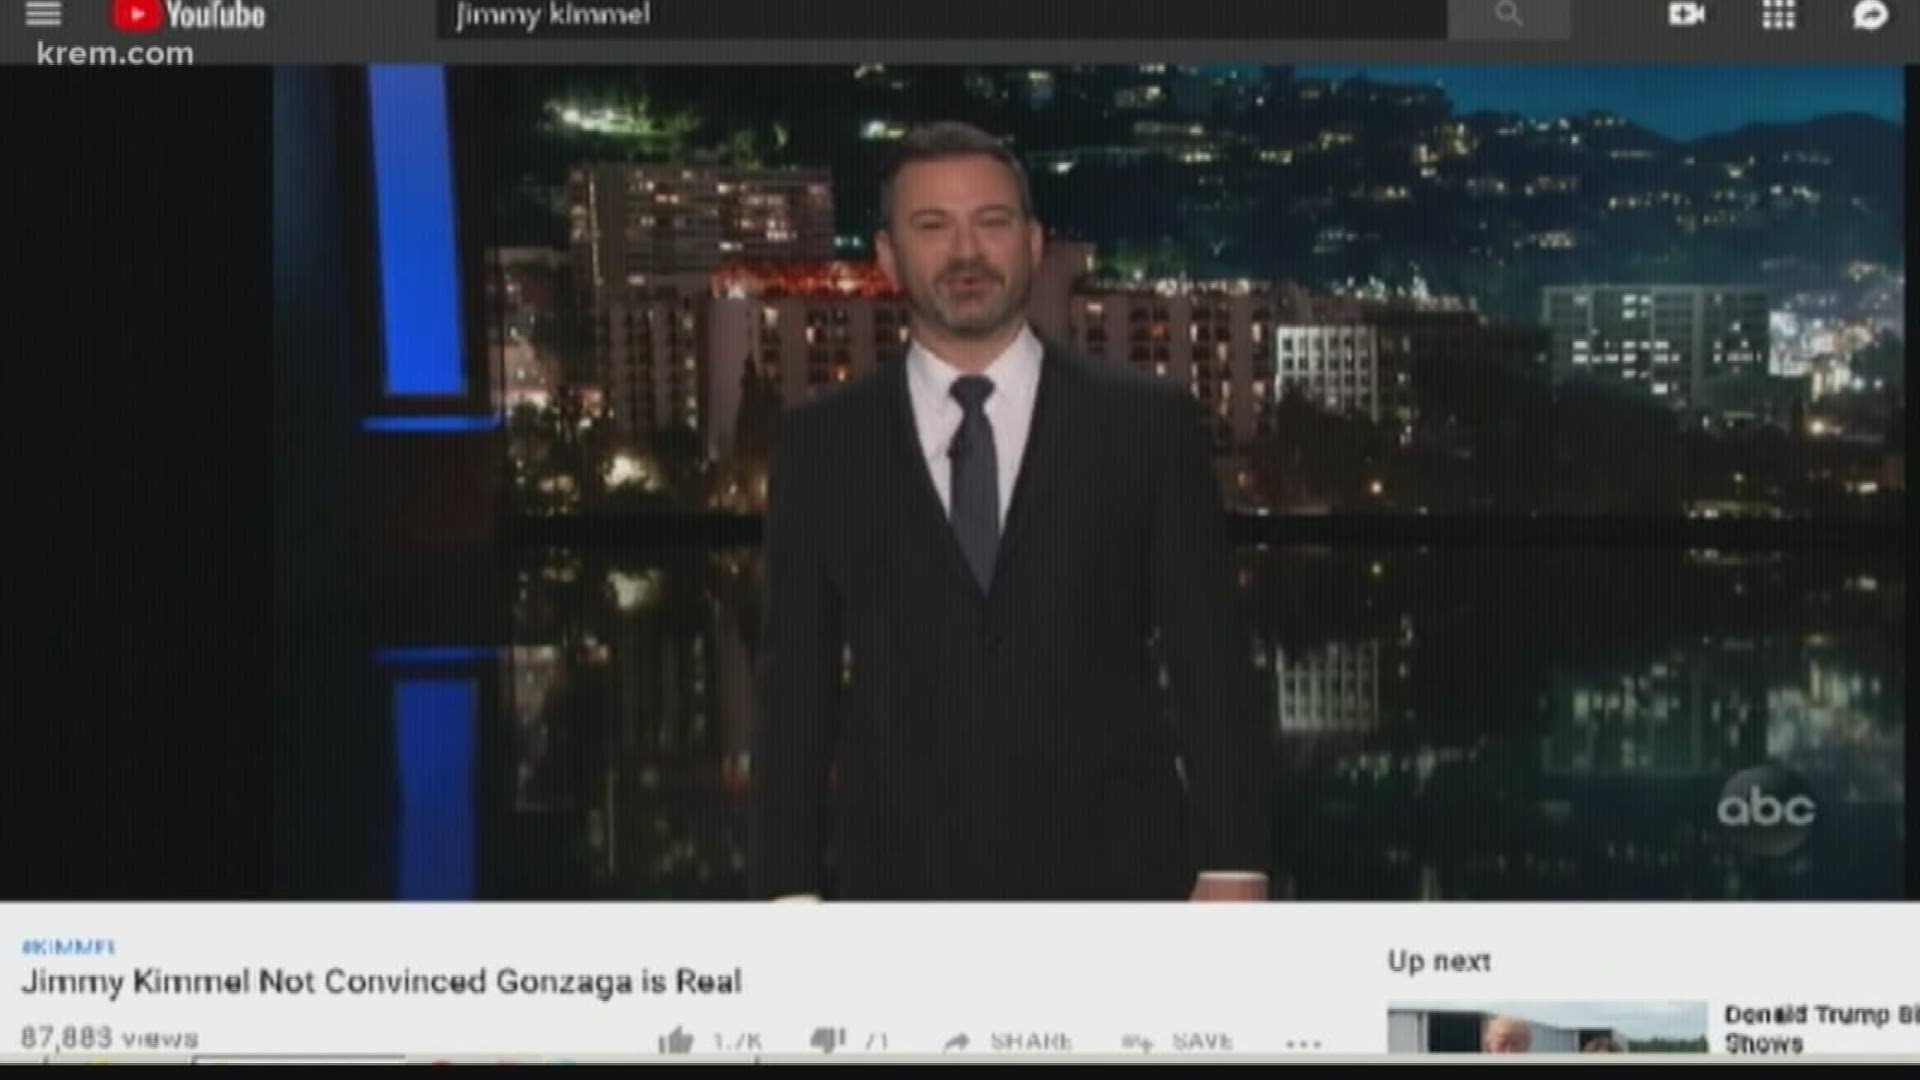 Student makes petition to bring Jimmy Kimmel to Gonzaga